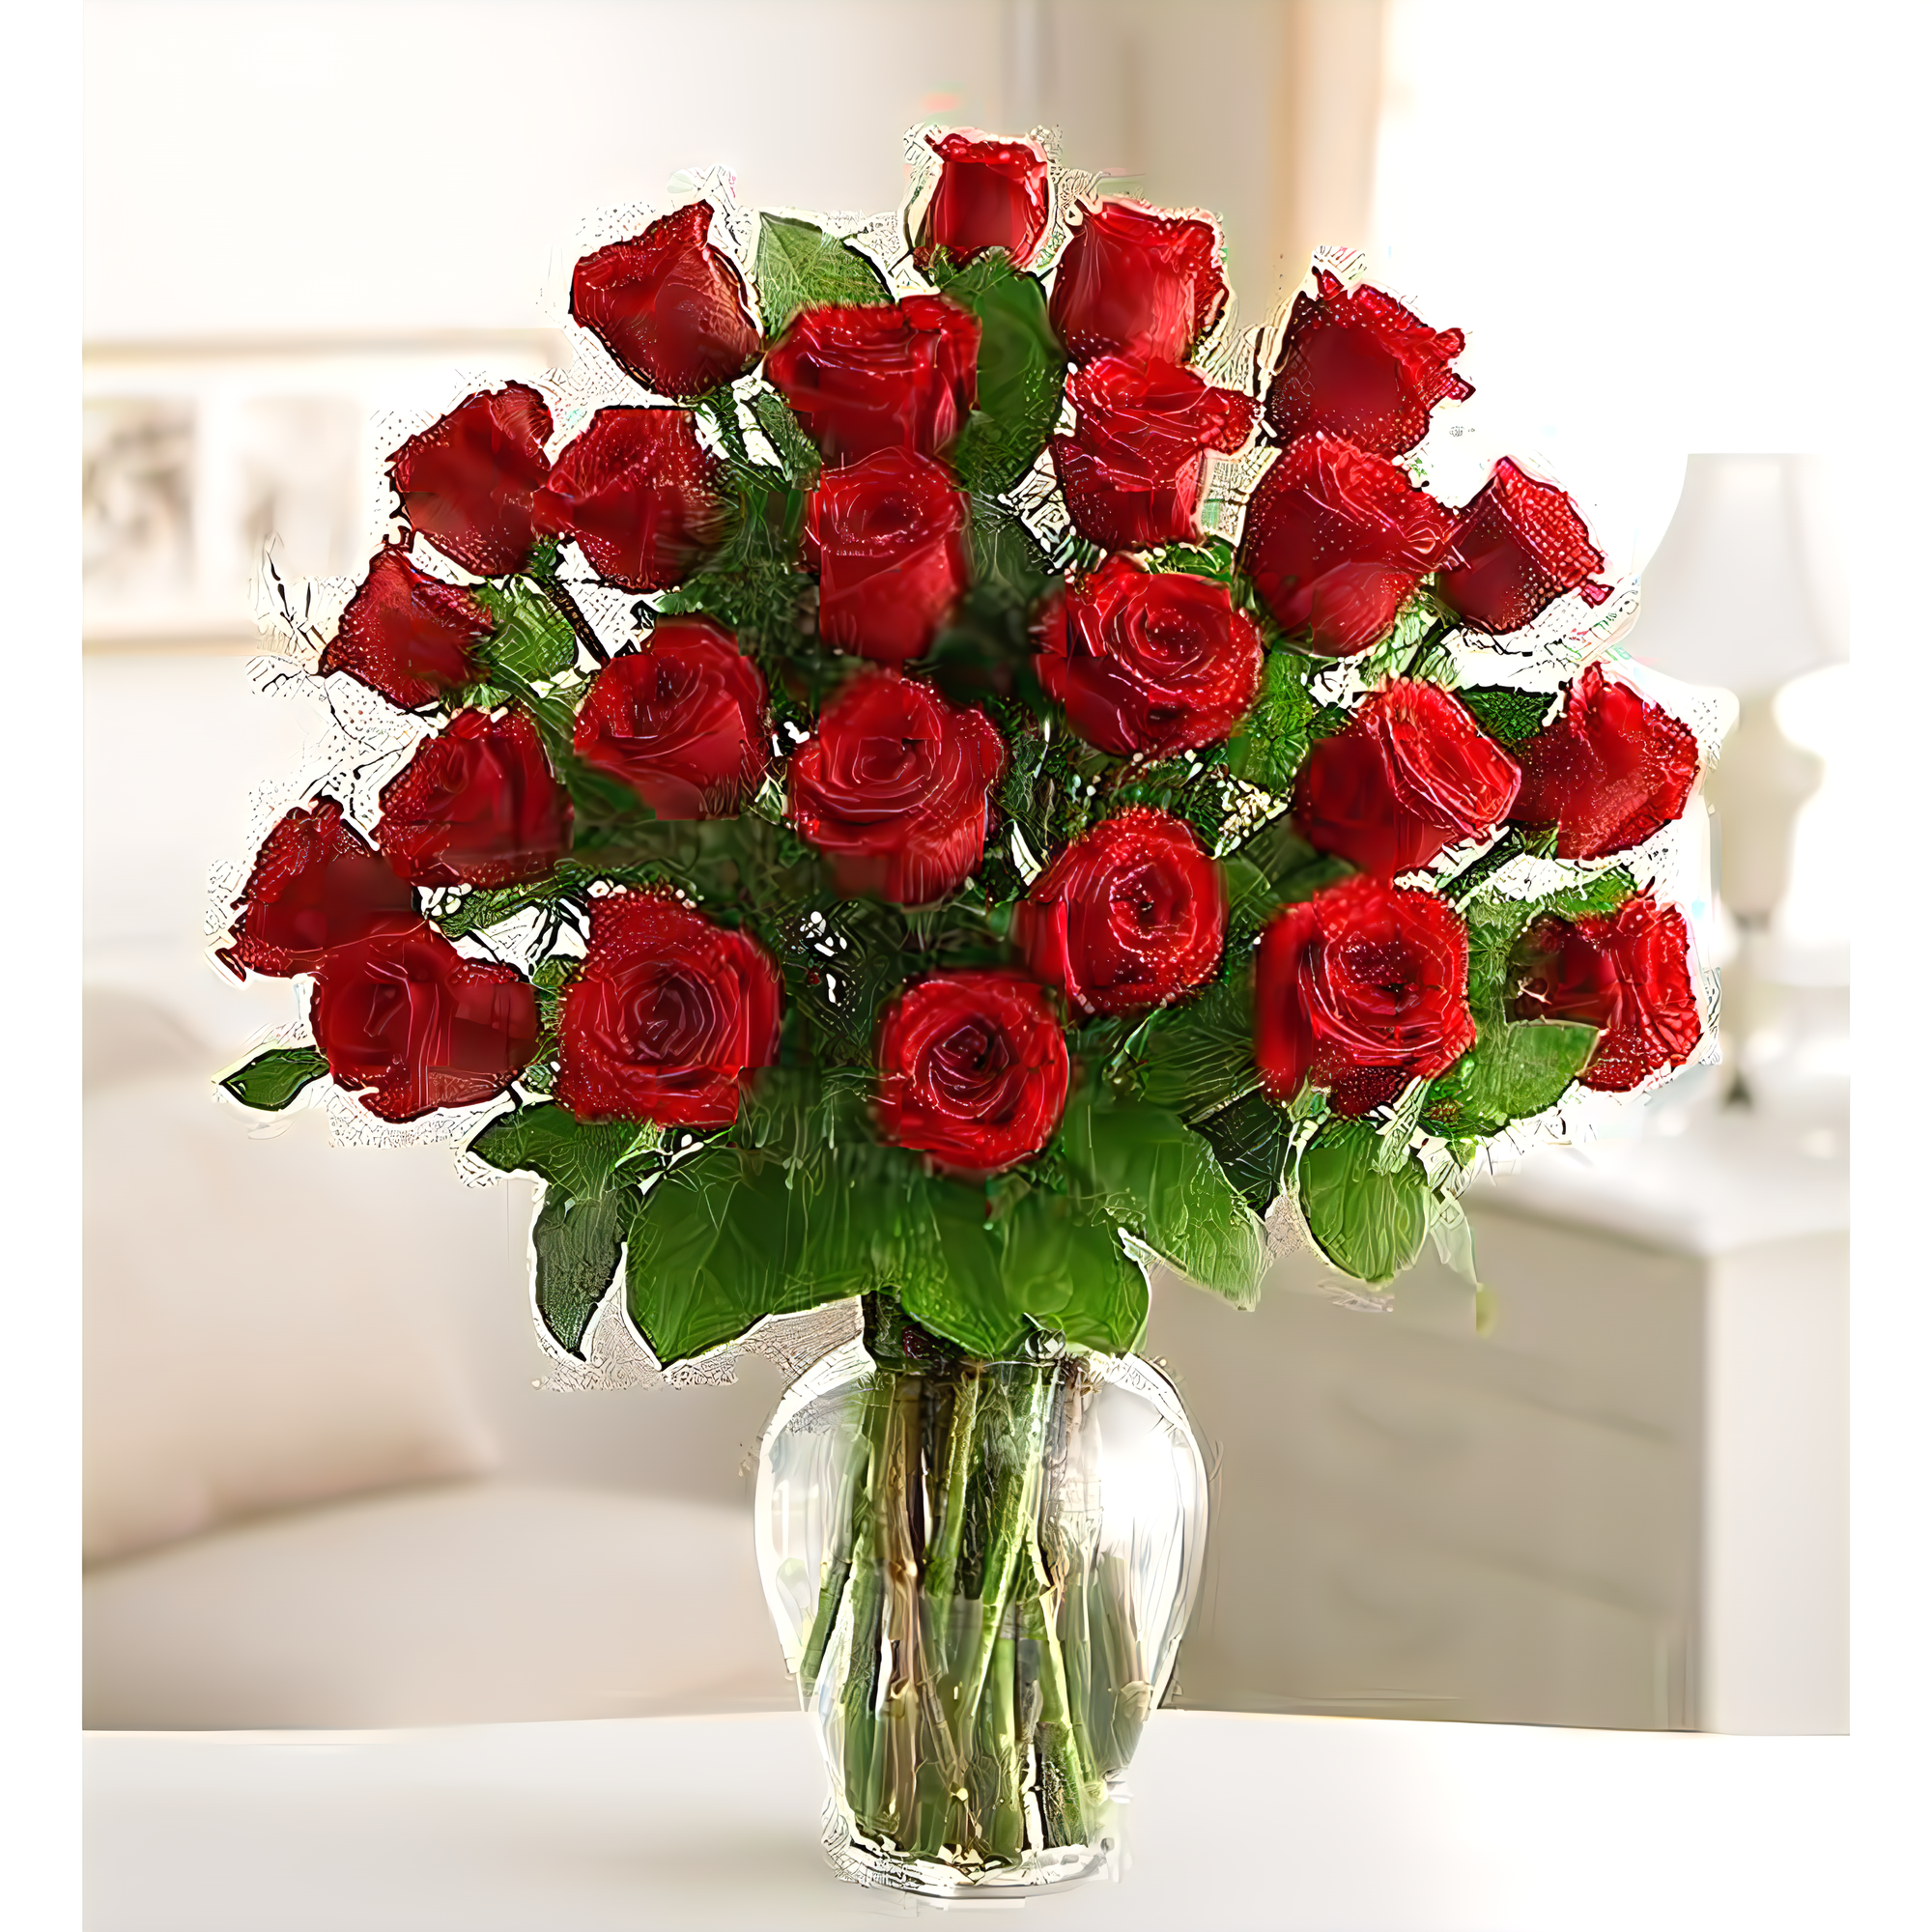 Manhattan Flower Delivery - Two Dozen Roses for Sympathy - Funeral > For the Service